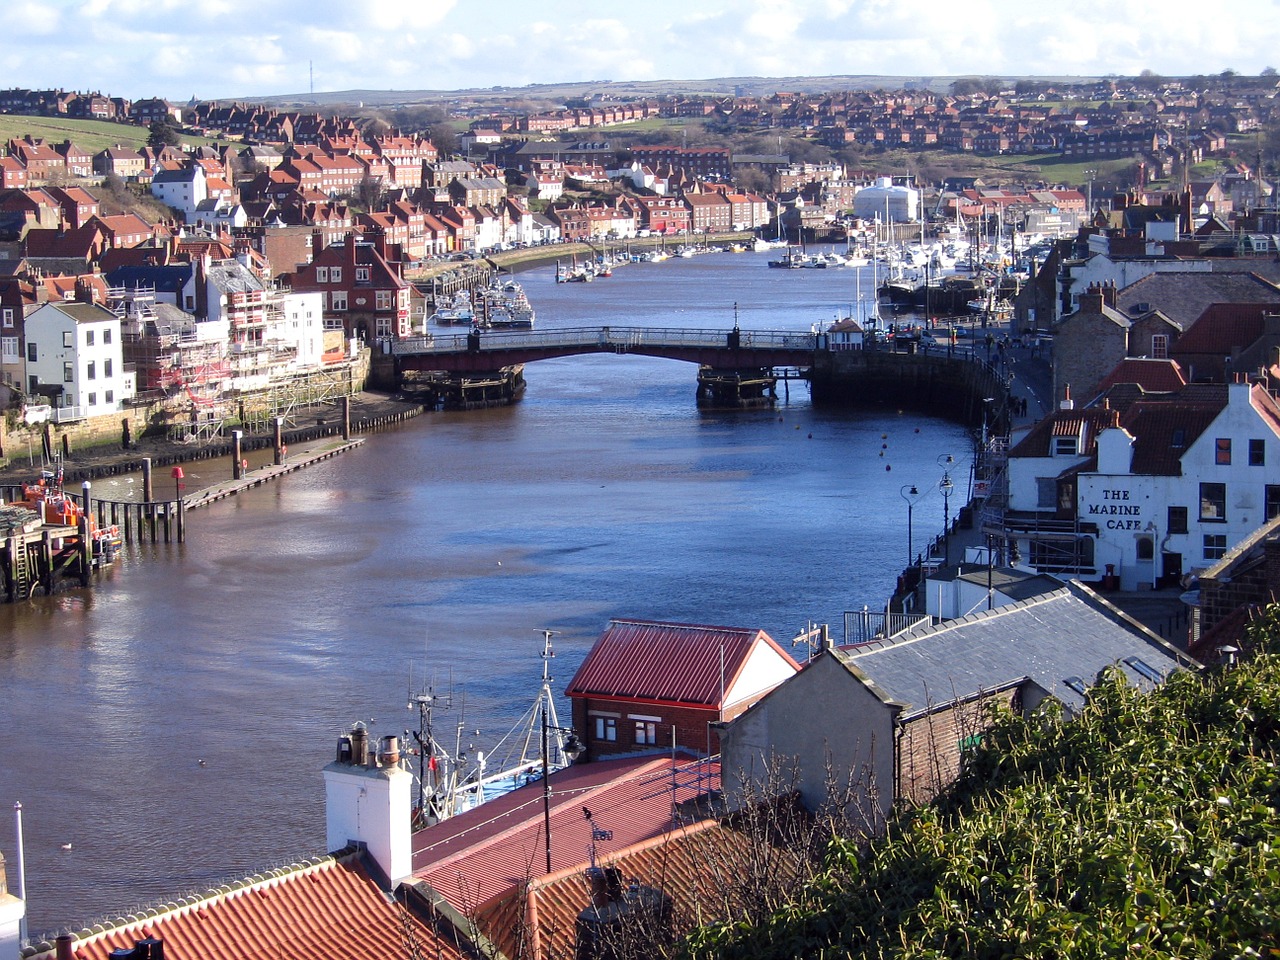 North-Yorkshire Whitby Harbour by Postbyte on Pixabay